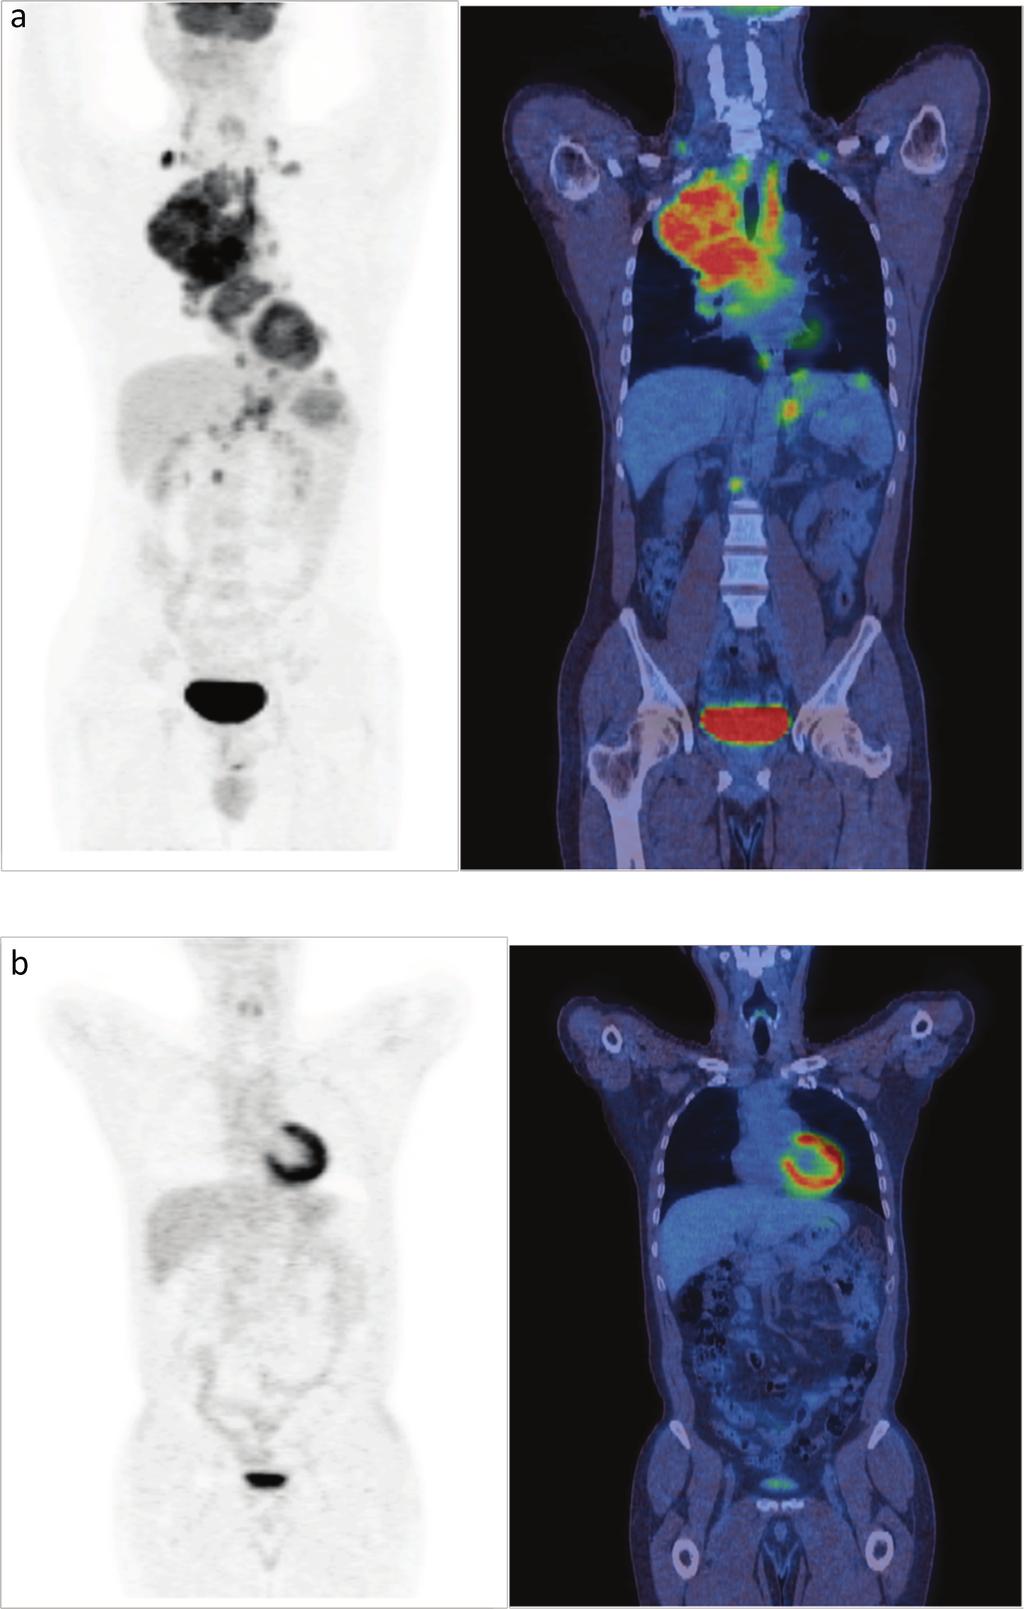 PET/CT in clinical oncology 18F-FDG The oncological applications of PET/CT imaging are wide (Table 1).3 18F-FDG has high sensitivity but is not tumour-specific.